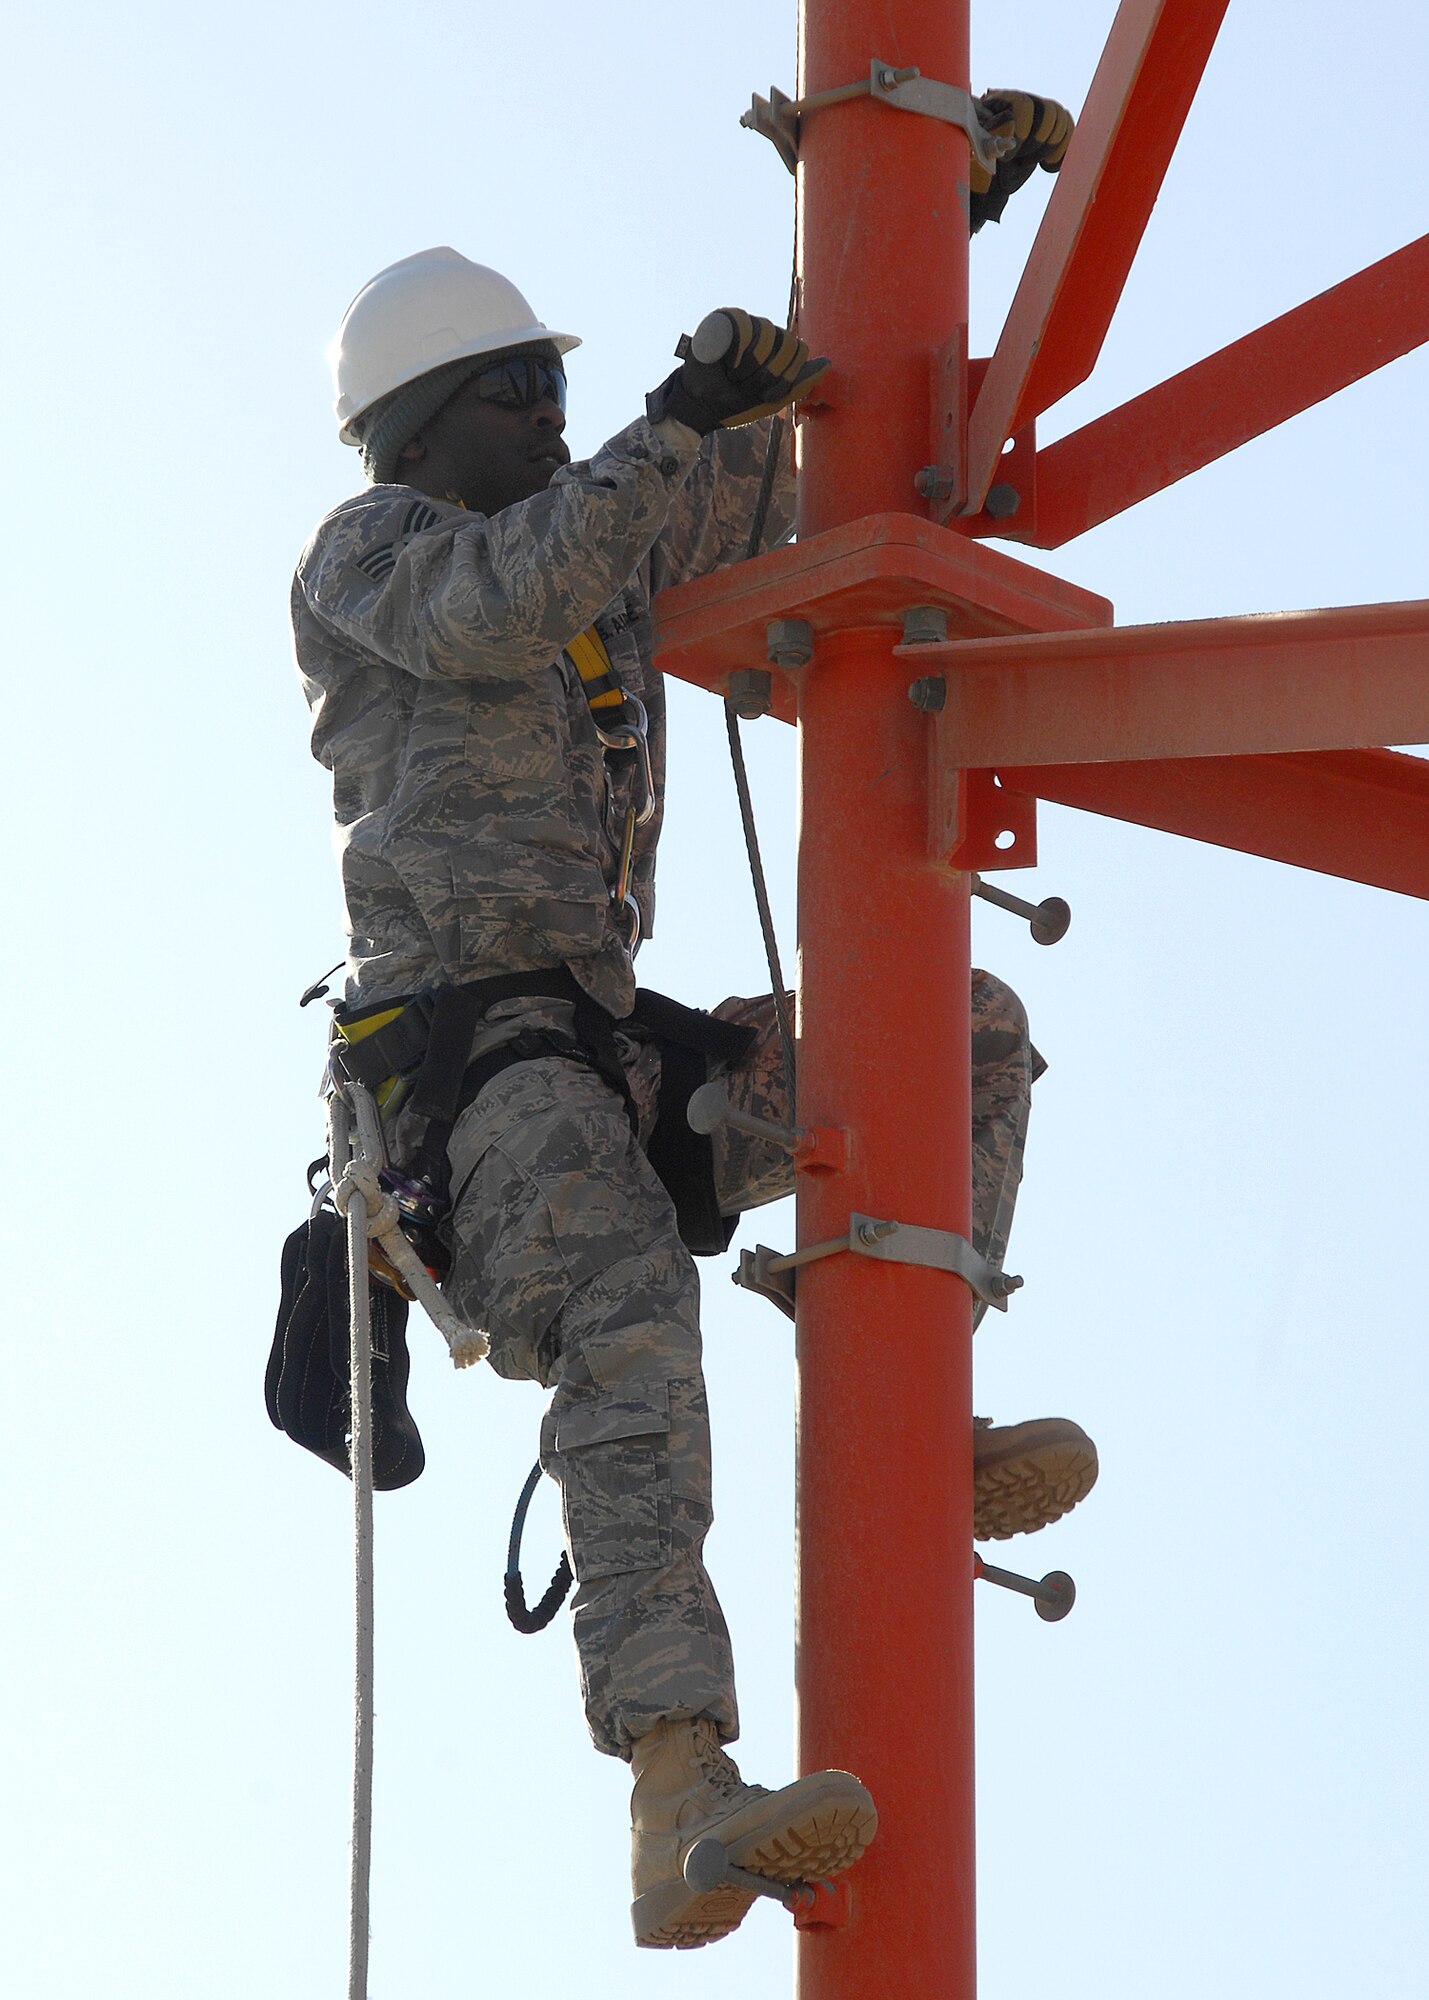 SOUTHWEST ASIA -- Senior Airman Lakendrick Fisher, 386th Expeditionary Communication Squadron Cable and Antenna Maintenance technician, climbs a communications tower to install a Radio Over Internet Protocol (ROIP) antenna on Dec. 15 at an air base in Southwest Asia. The 386th ECS Cable Maintenance shop provides command and control capabilities through installation, maintenance, fault isolation and reconstitution of fixed cable and wireless distribution systems, local area networks and wide area networks in support of tactical and strategic operations. Airman Fisher is deployed from Yokota Air Base, Japan.  (U.S. Air Force photo/Tech. Sgt. Raheem Moore)